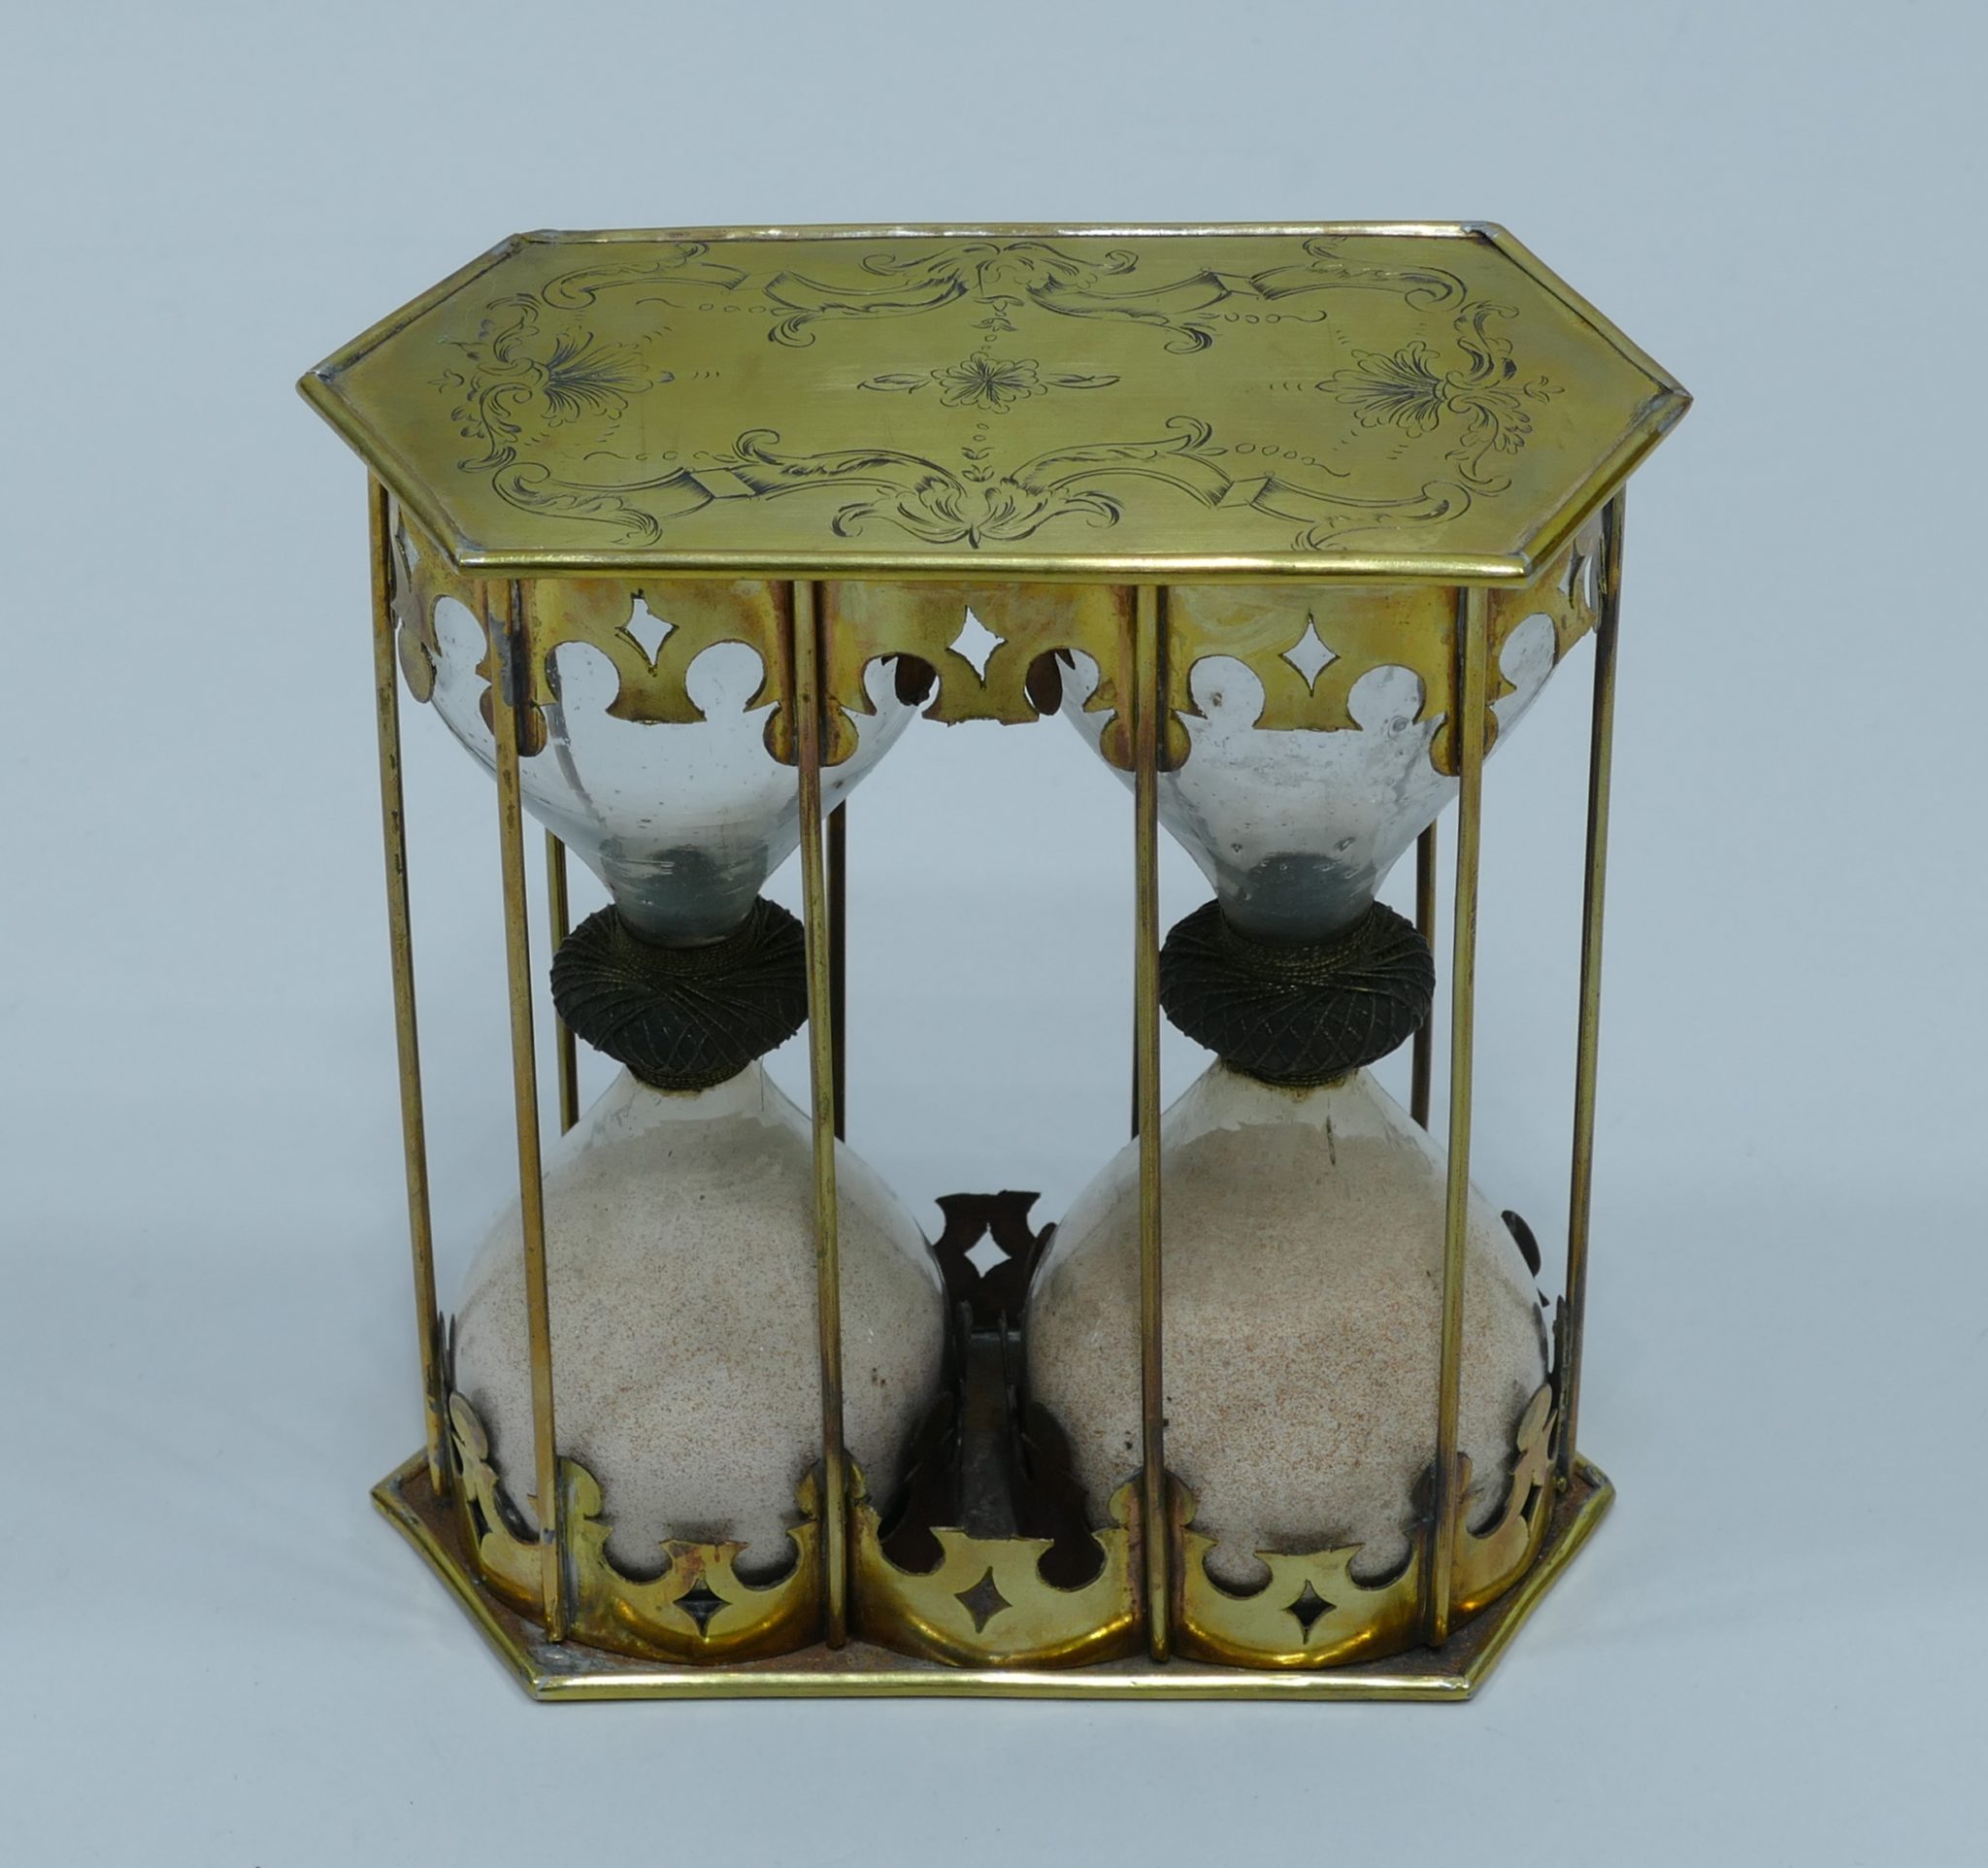 17th century double brass hourglass with flower decors